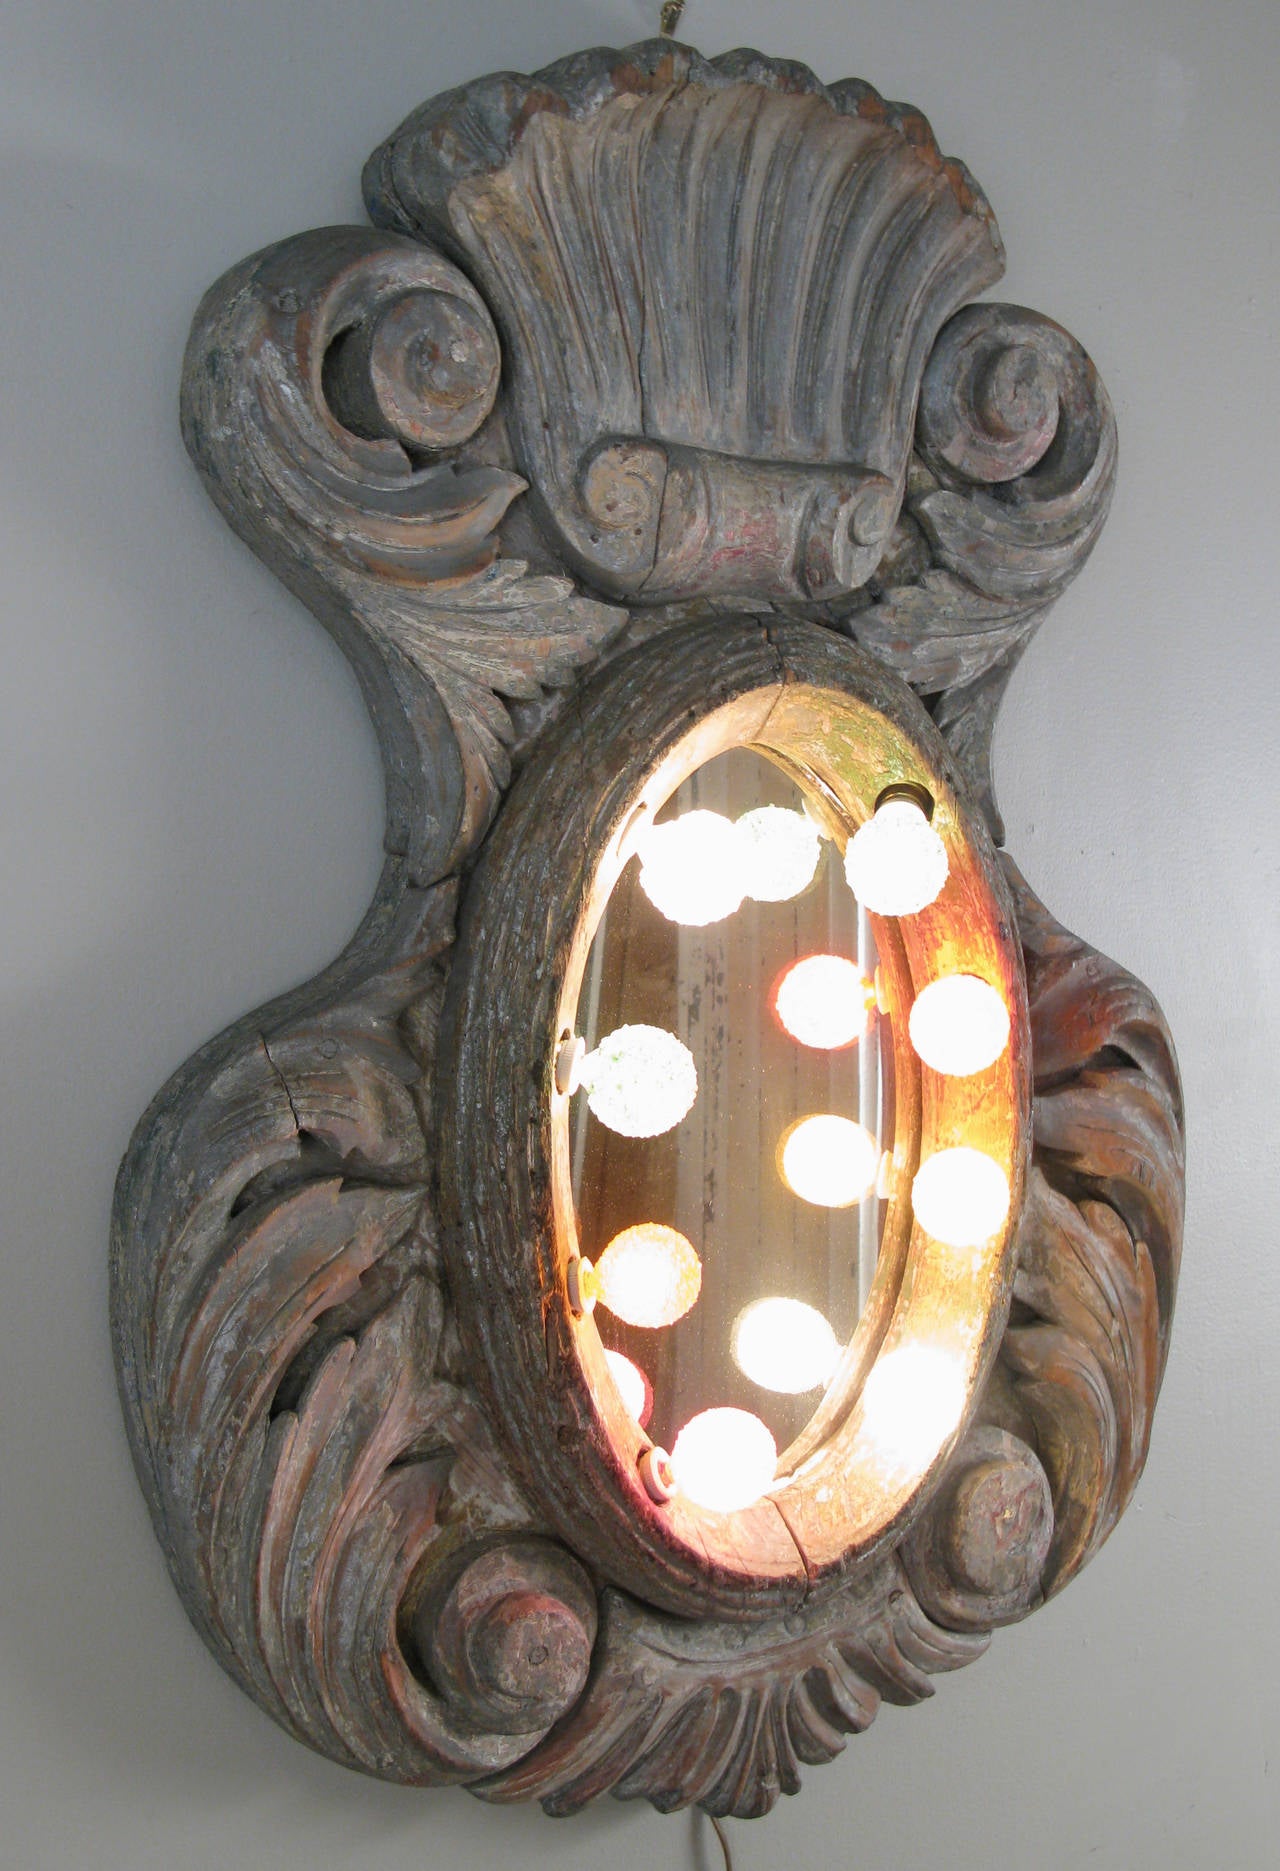 A wonderful heavily carved antique carousel mirror, with a border of lights and some hints of the original painted finish. Restored and rewired, it is a unique and original beauty!